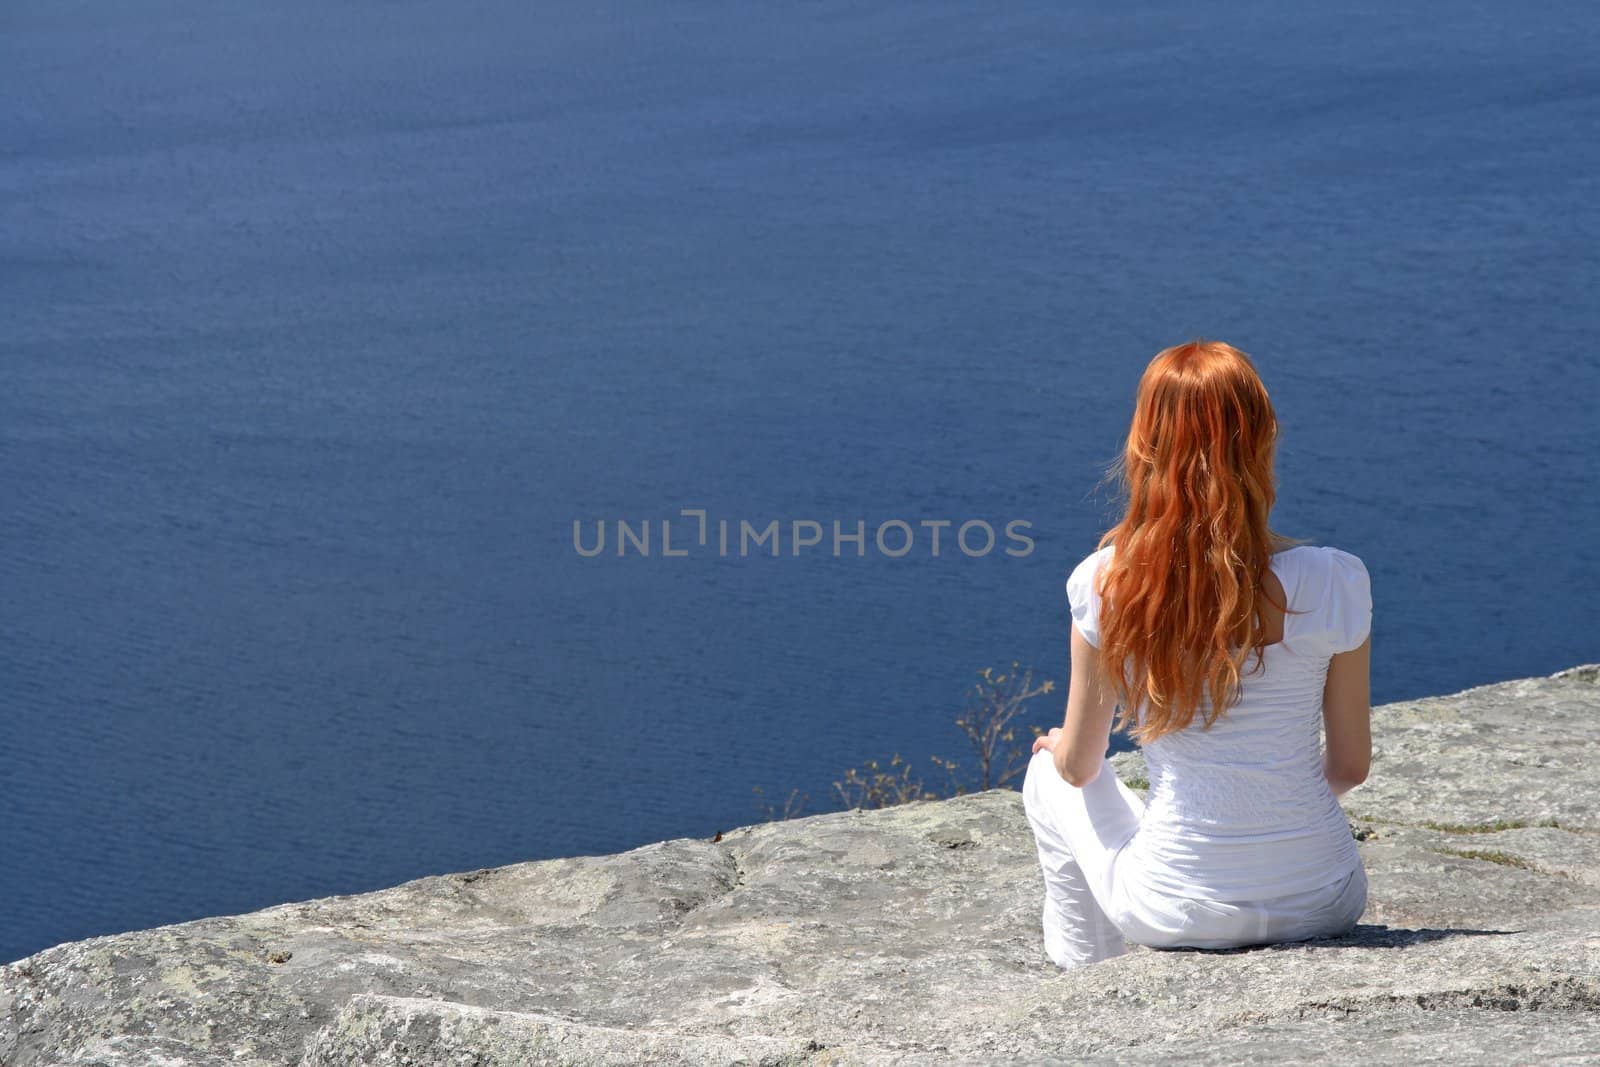 Red-haired girl sitting on a rock and looking over blue water.